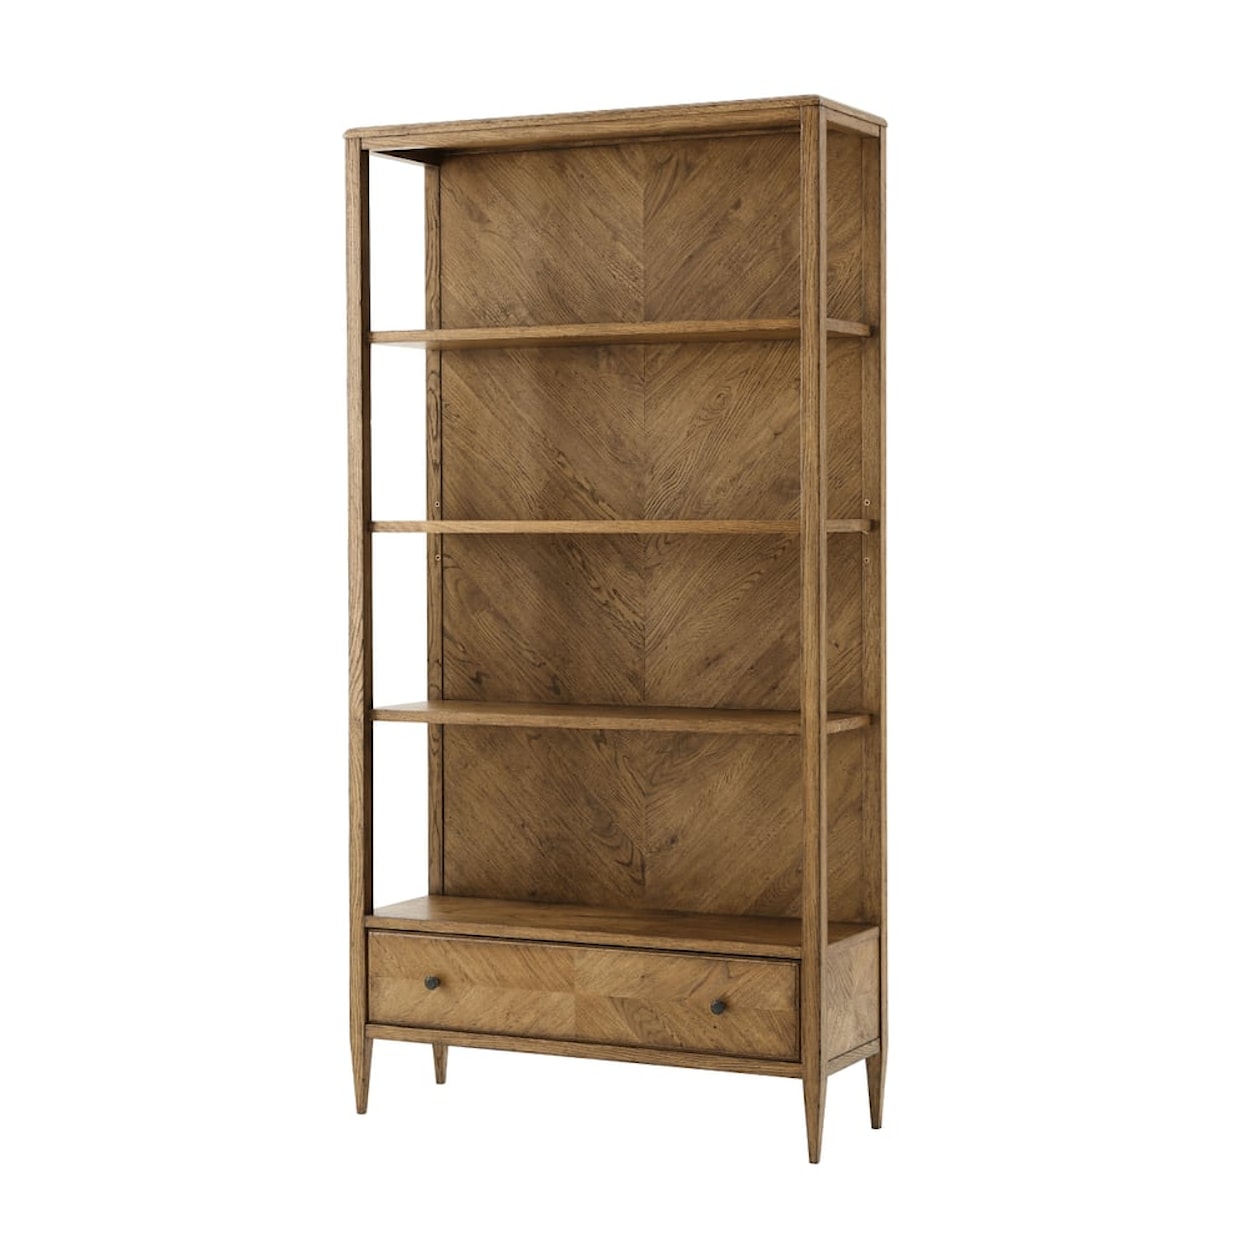 Theodore Alexander Nova Open Bookcase with Drawer